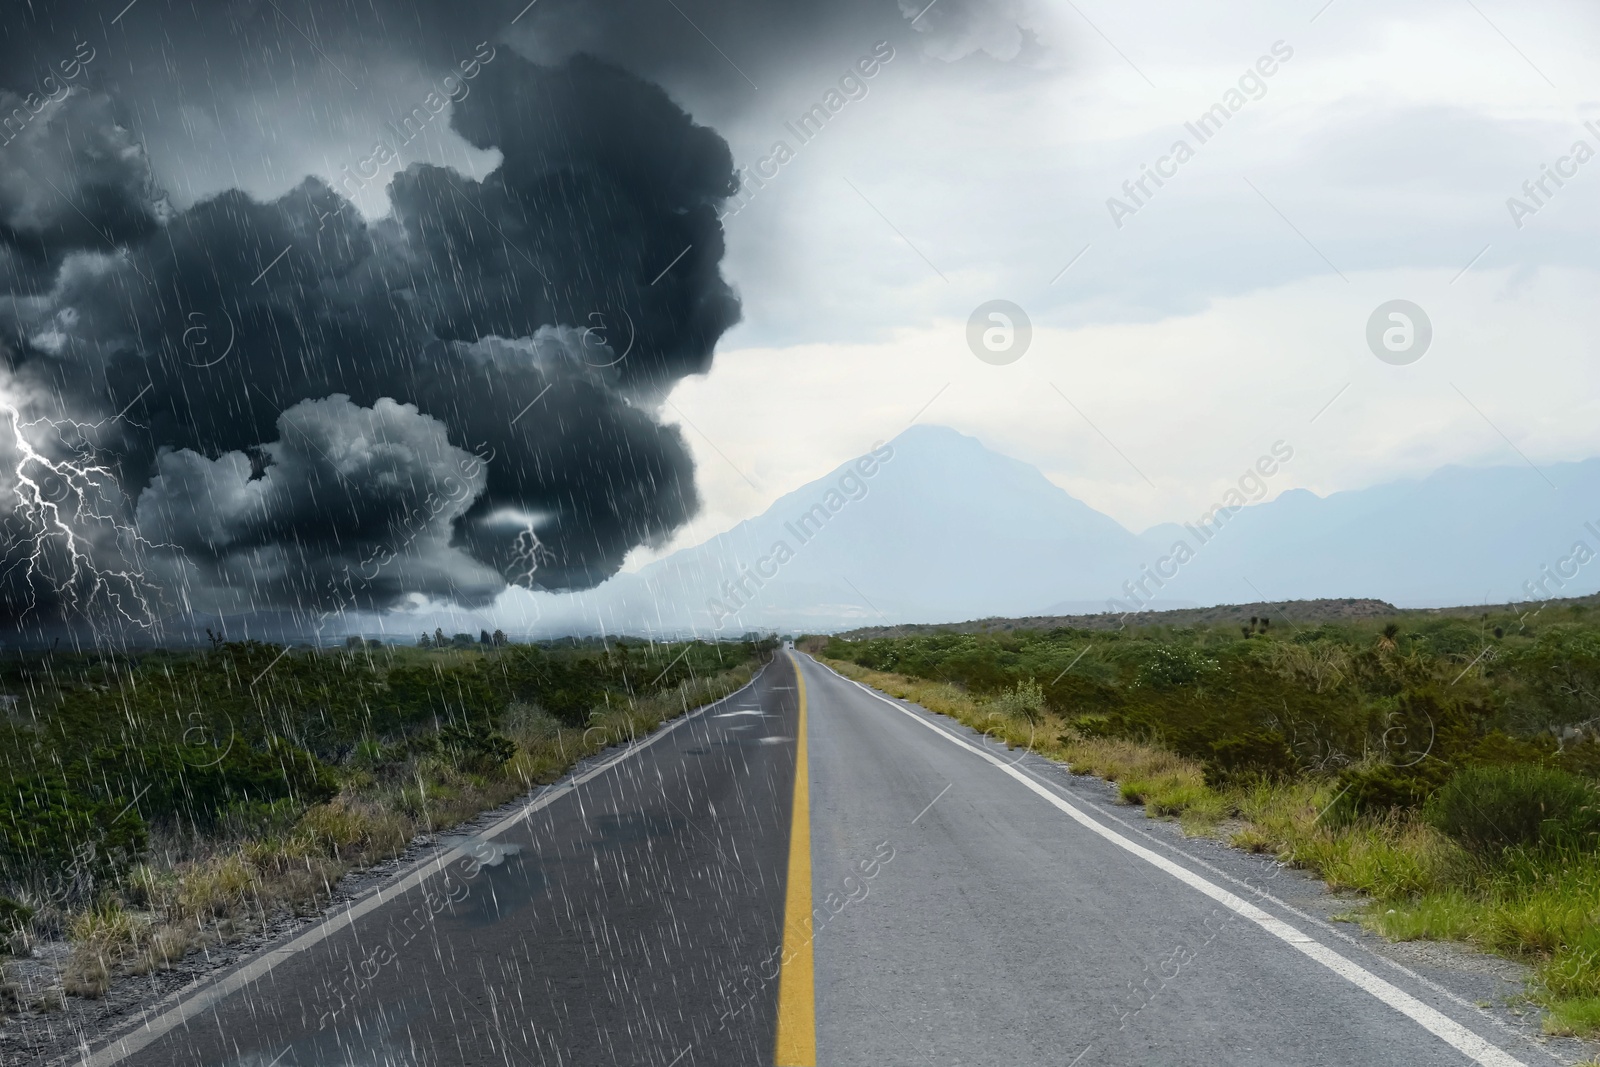 Image of Collage with landscape on cloudy day on one side and during downpour on other. Weather changes